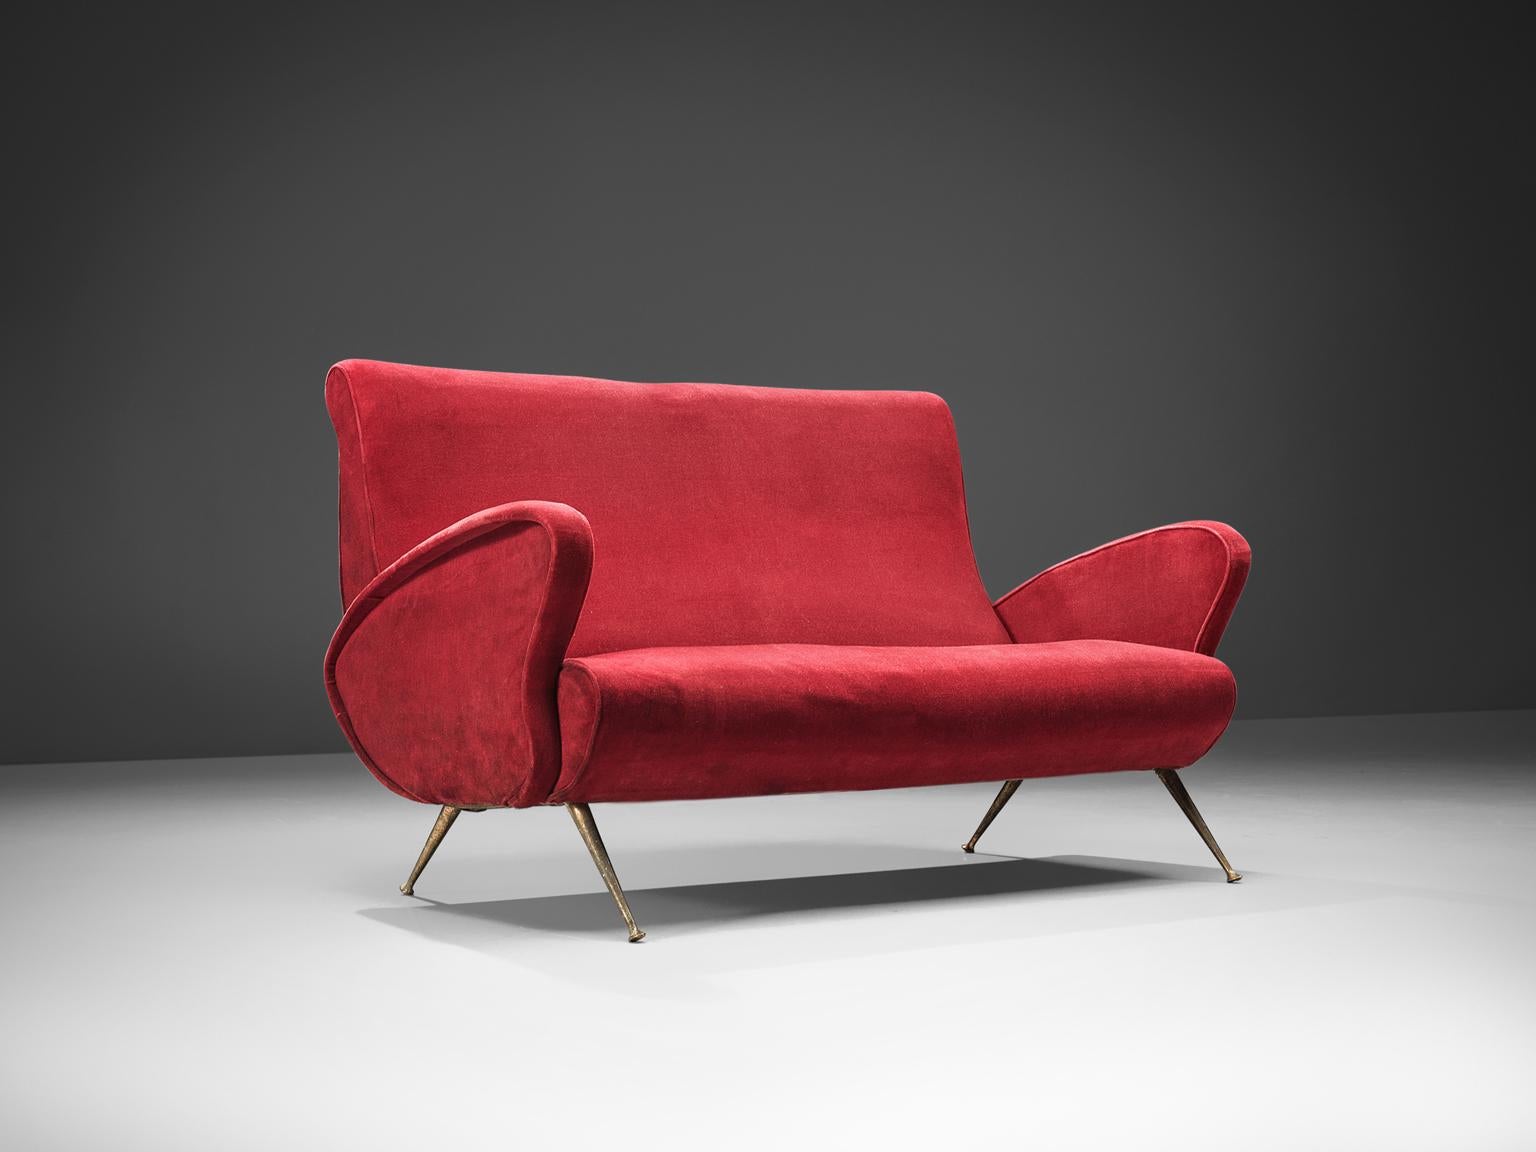 Settee, red velvet, brass, Italy, 1950s.

This sofa is an iconic example of Italian design from the 1950s. Organic and sculptural, this two-seat sofa is anything but minimalistic. Equipped with the original stiletto brass feet which are narrow